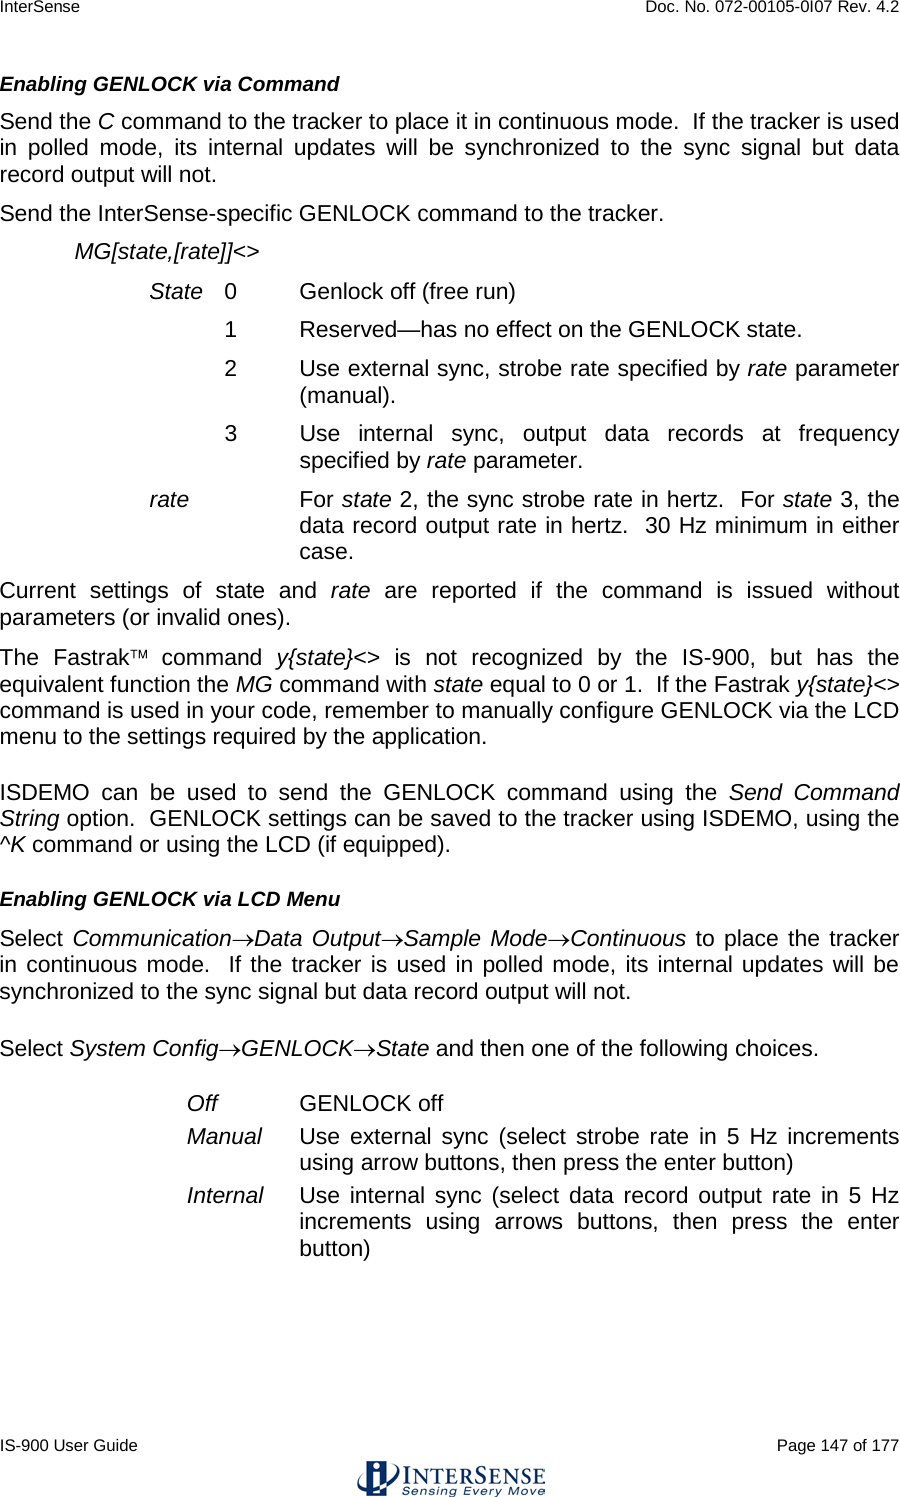 InterSense    Doc. No. 072-00105-0I07 Rev. 4.2 IS-900 User Guide                                                                                                                                          Page 147 of 177  Enabling GENLOCK via Command Send the C command to the tracker to place it in continuous mode.  If the tracker is used in polled mode, its internal updates will be synchronized to the sync signal but data record output will not. Send the InterSense-specific GENLOCK command to the tracker. MG[state,[rate]]&lt;&gt; State 0  Genlock off (free run) 1  Reserved—has no effect on the GENLOCK state. 2  Use external sync, strobe rate specified by rate parameter (manual). 3  Use internal sync, output data records at frequency specified by rate parameter. rate For state 2, the sync strobe rate in hertz.  For state 3, the data record output rate in hertz.  30 Hz minimum in either case. Current settings of state and rate are reported if the command is issued without parameters (or invalid ones). The Fastrak command  y{state}&lt;&gt; is not recognized by the IS-900, but has the equivalent function the MG command with state equal to 0 or 1.  If the Fastrak y{state}&lt;&gt; command is used in your code, remember to manually configure GENLOCK via the LCD menu to the settings required by the application. ISDEMO can be used to send the GENLOCK command using the Send Command String option.  GENLOCK settings can be saved to the tracker using ISDEMO, using the ^K command or using the LCD (if equipped). Enabling GENLOCK via LCD Menu Select Communication→Data Output→Sample Mode→Continuous to place the tracker in continuous mode.  If the tracker is used in polled mode, its internal updates will be synchronized to the sync signal but data record output will not. Select System Config→GENLOCK→State and then one of the following choices. Off GENLOCK off Manual Use external sync (select strobe rate in 5 Hz increments using arrow buttons, then press the enter button) Internal Use internal sync (select data record output rate in 5 Hz increments using arrows buttons, then press the enter button) 